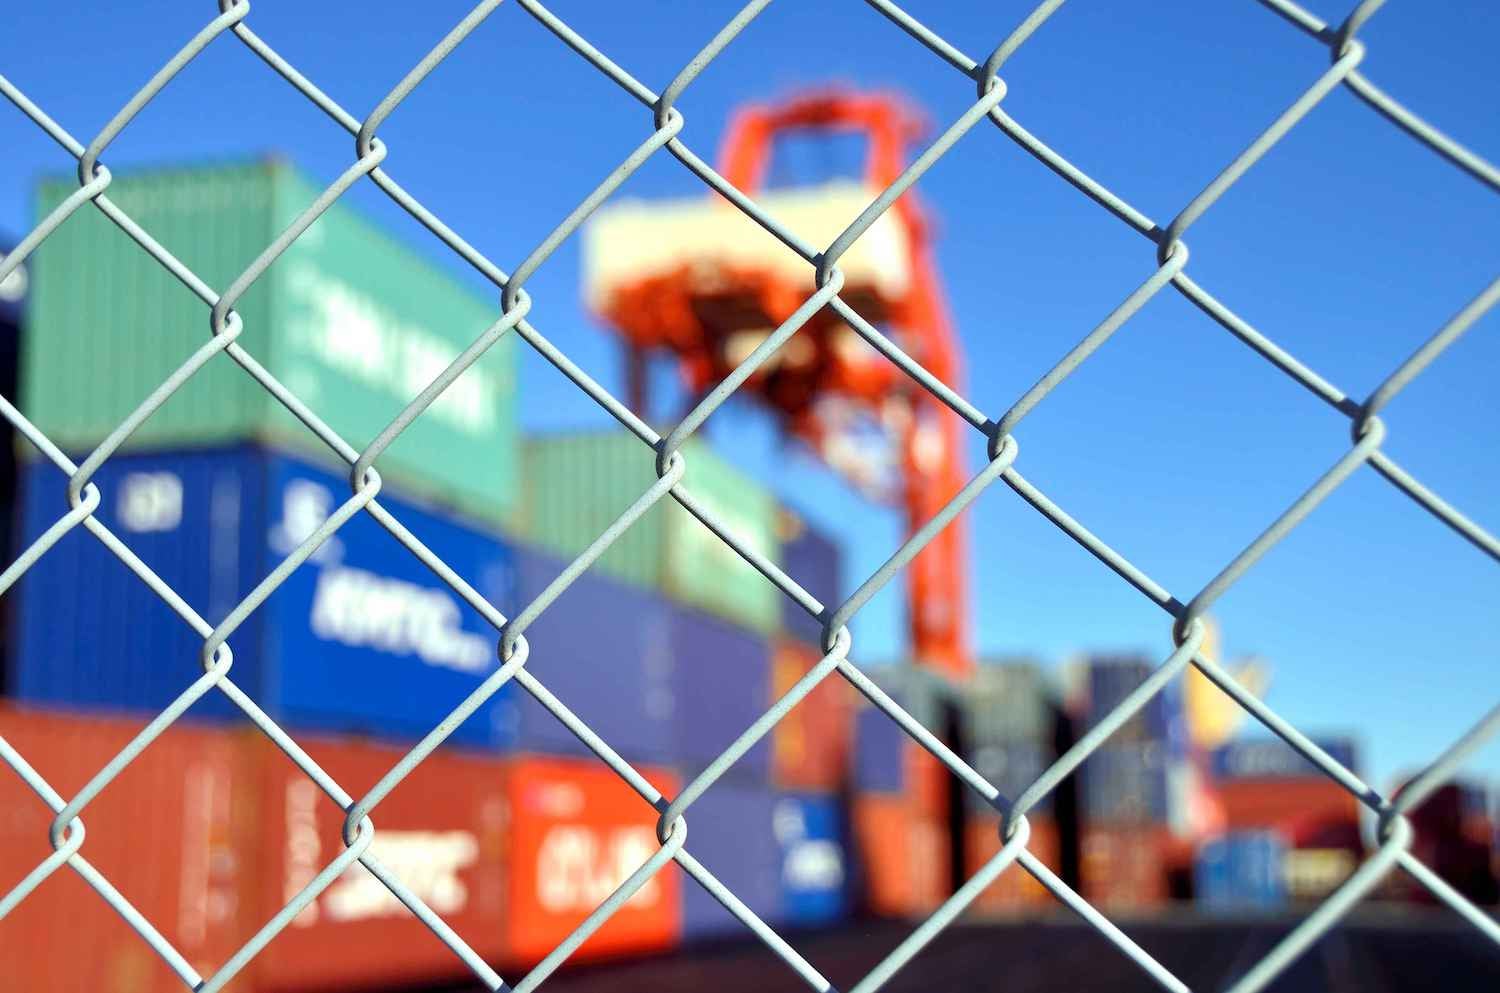 Chainlink fence with a cargo ship in the background